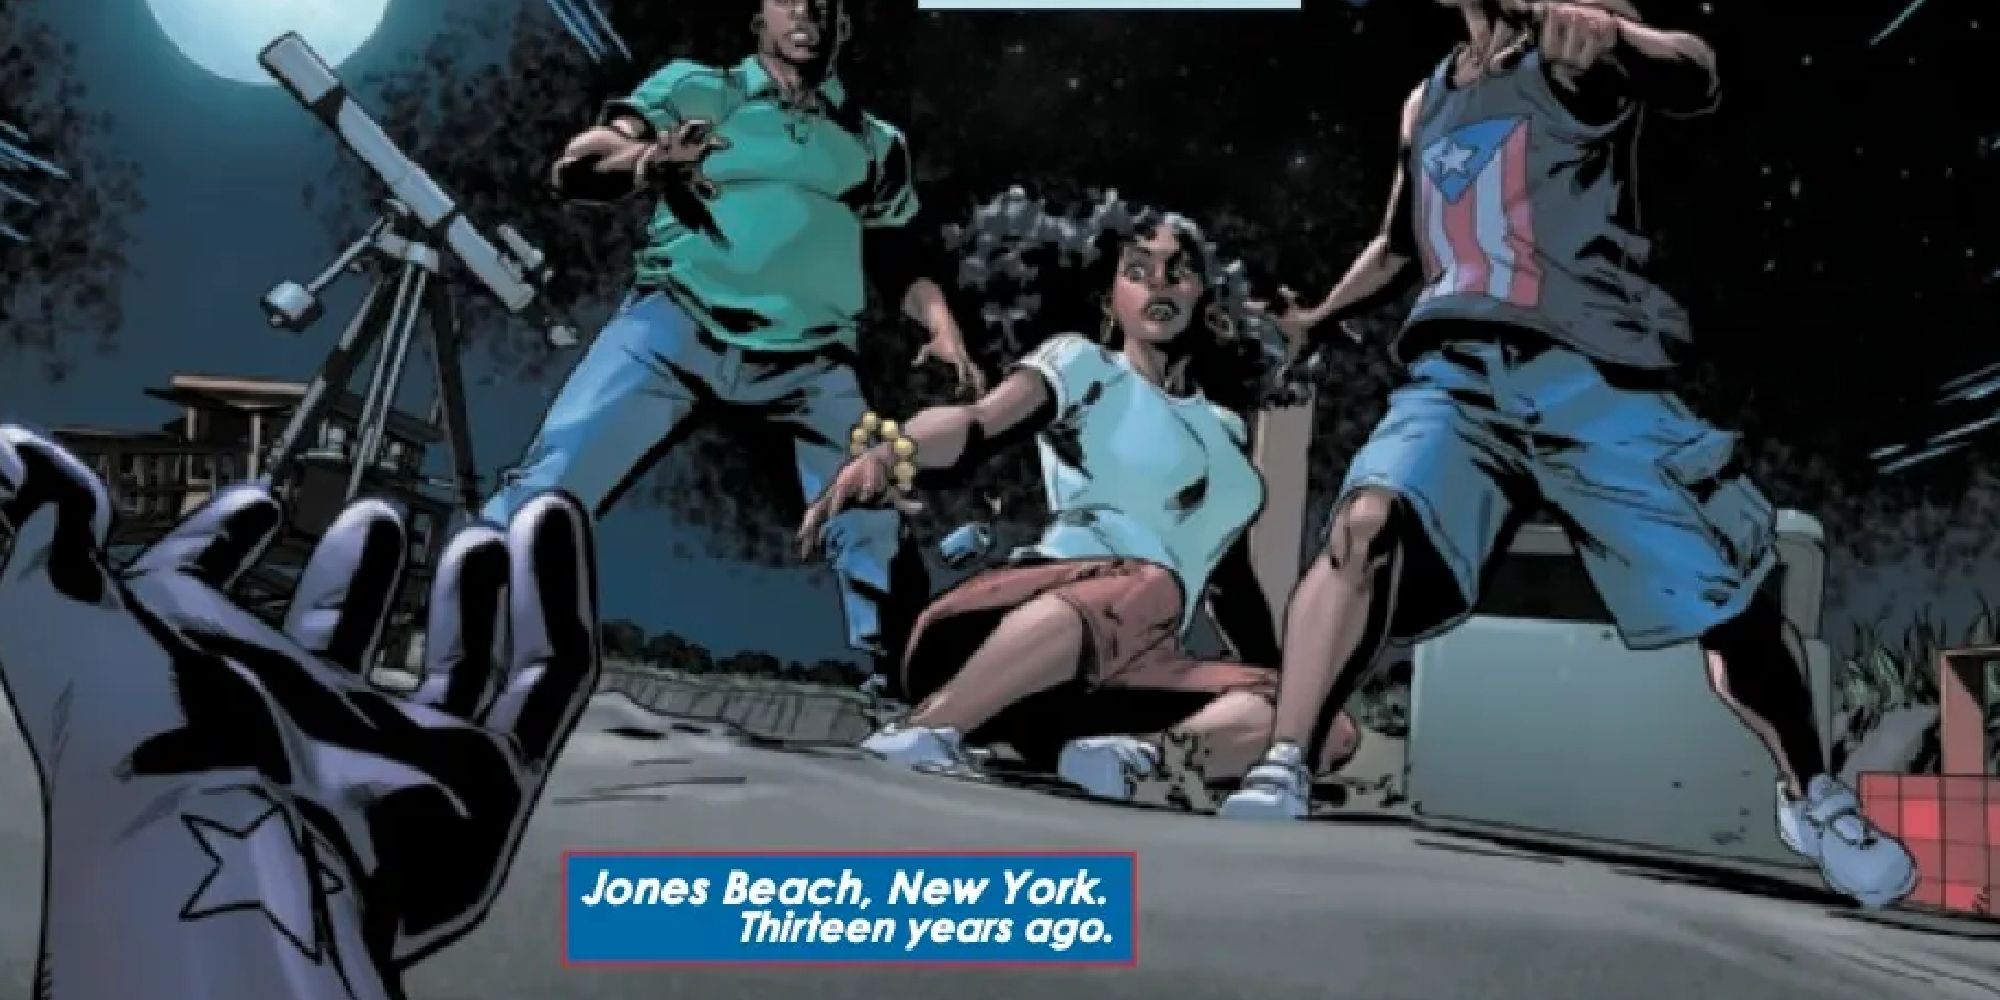 America discovered on Jones Beach by the Santana family in the comics